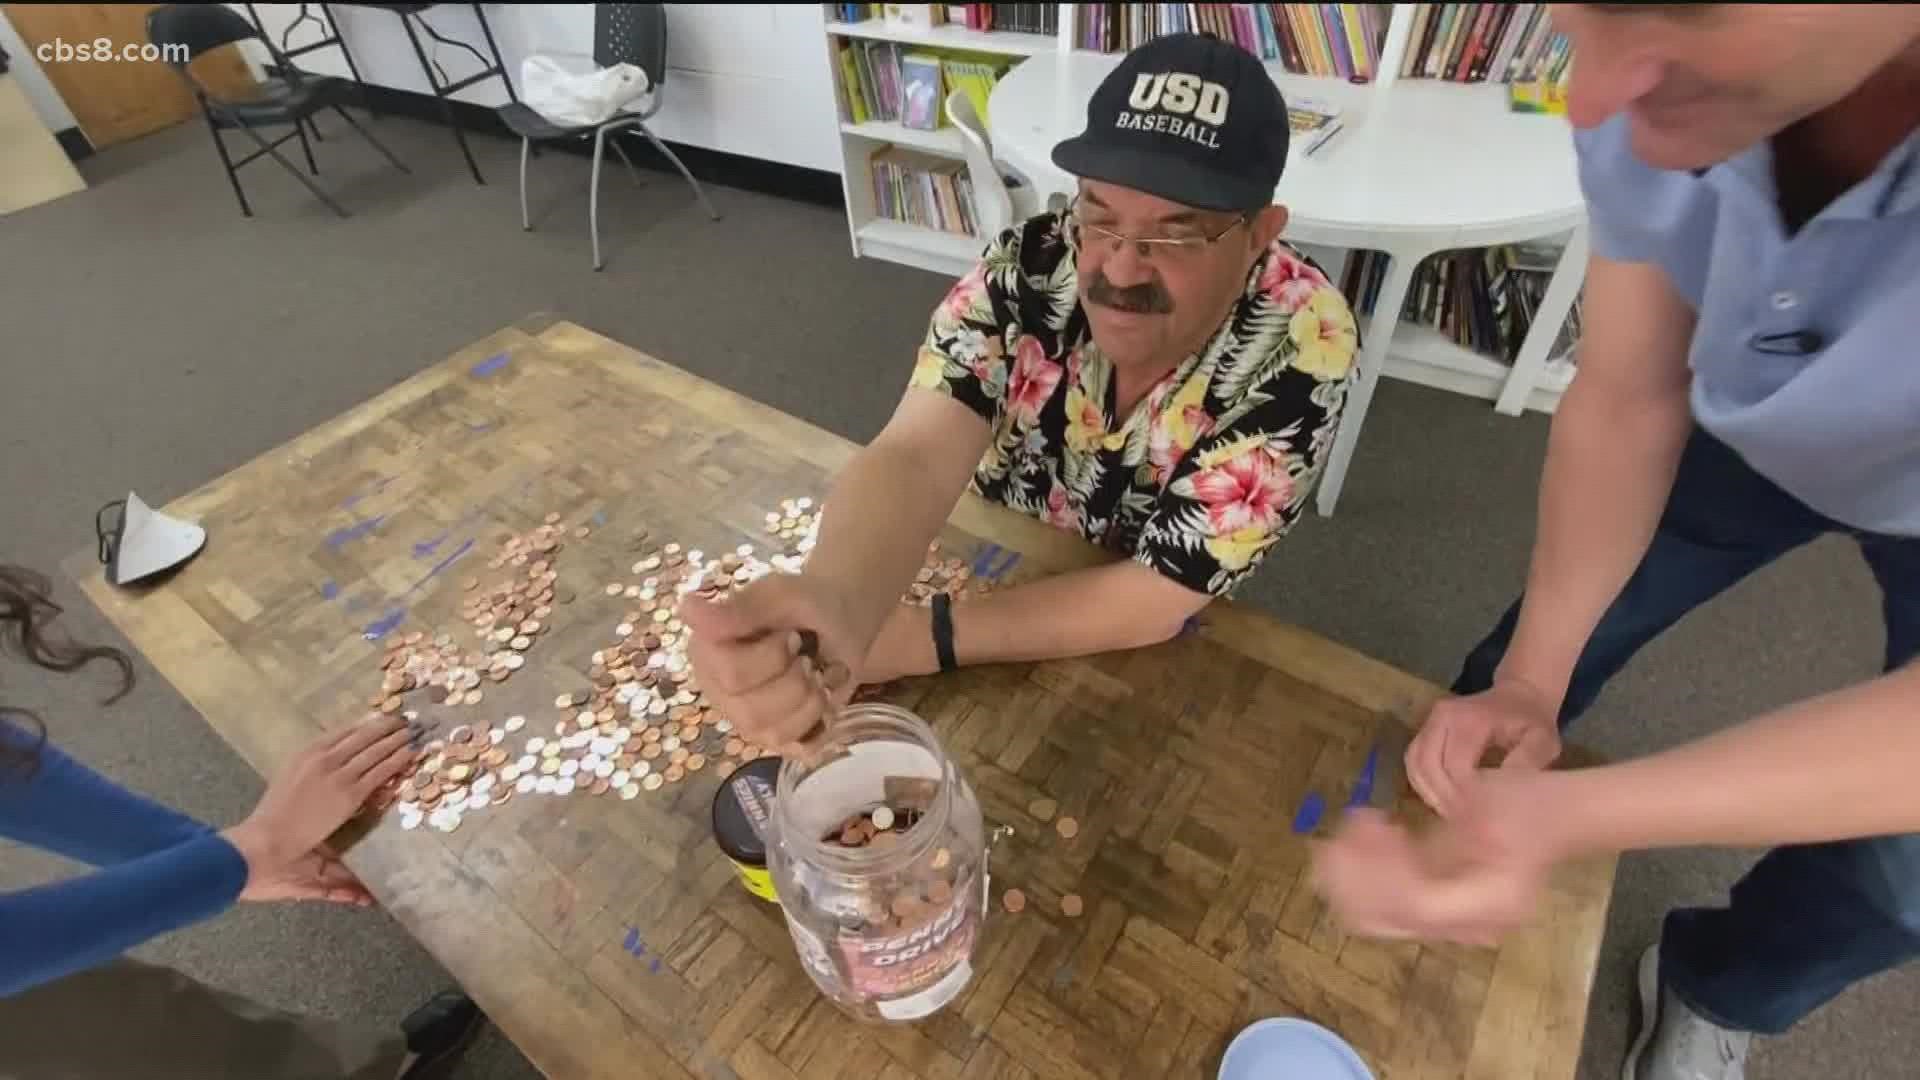 Art's Army says never underestimate the power of giving even when it comes to a penny.